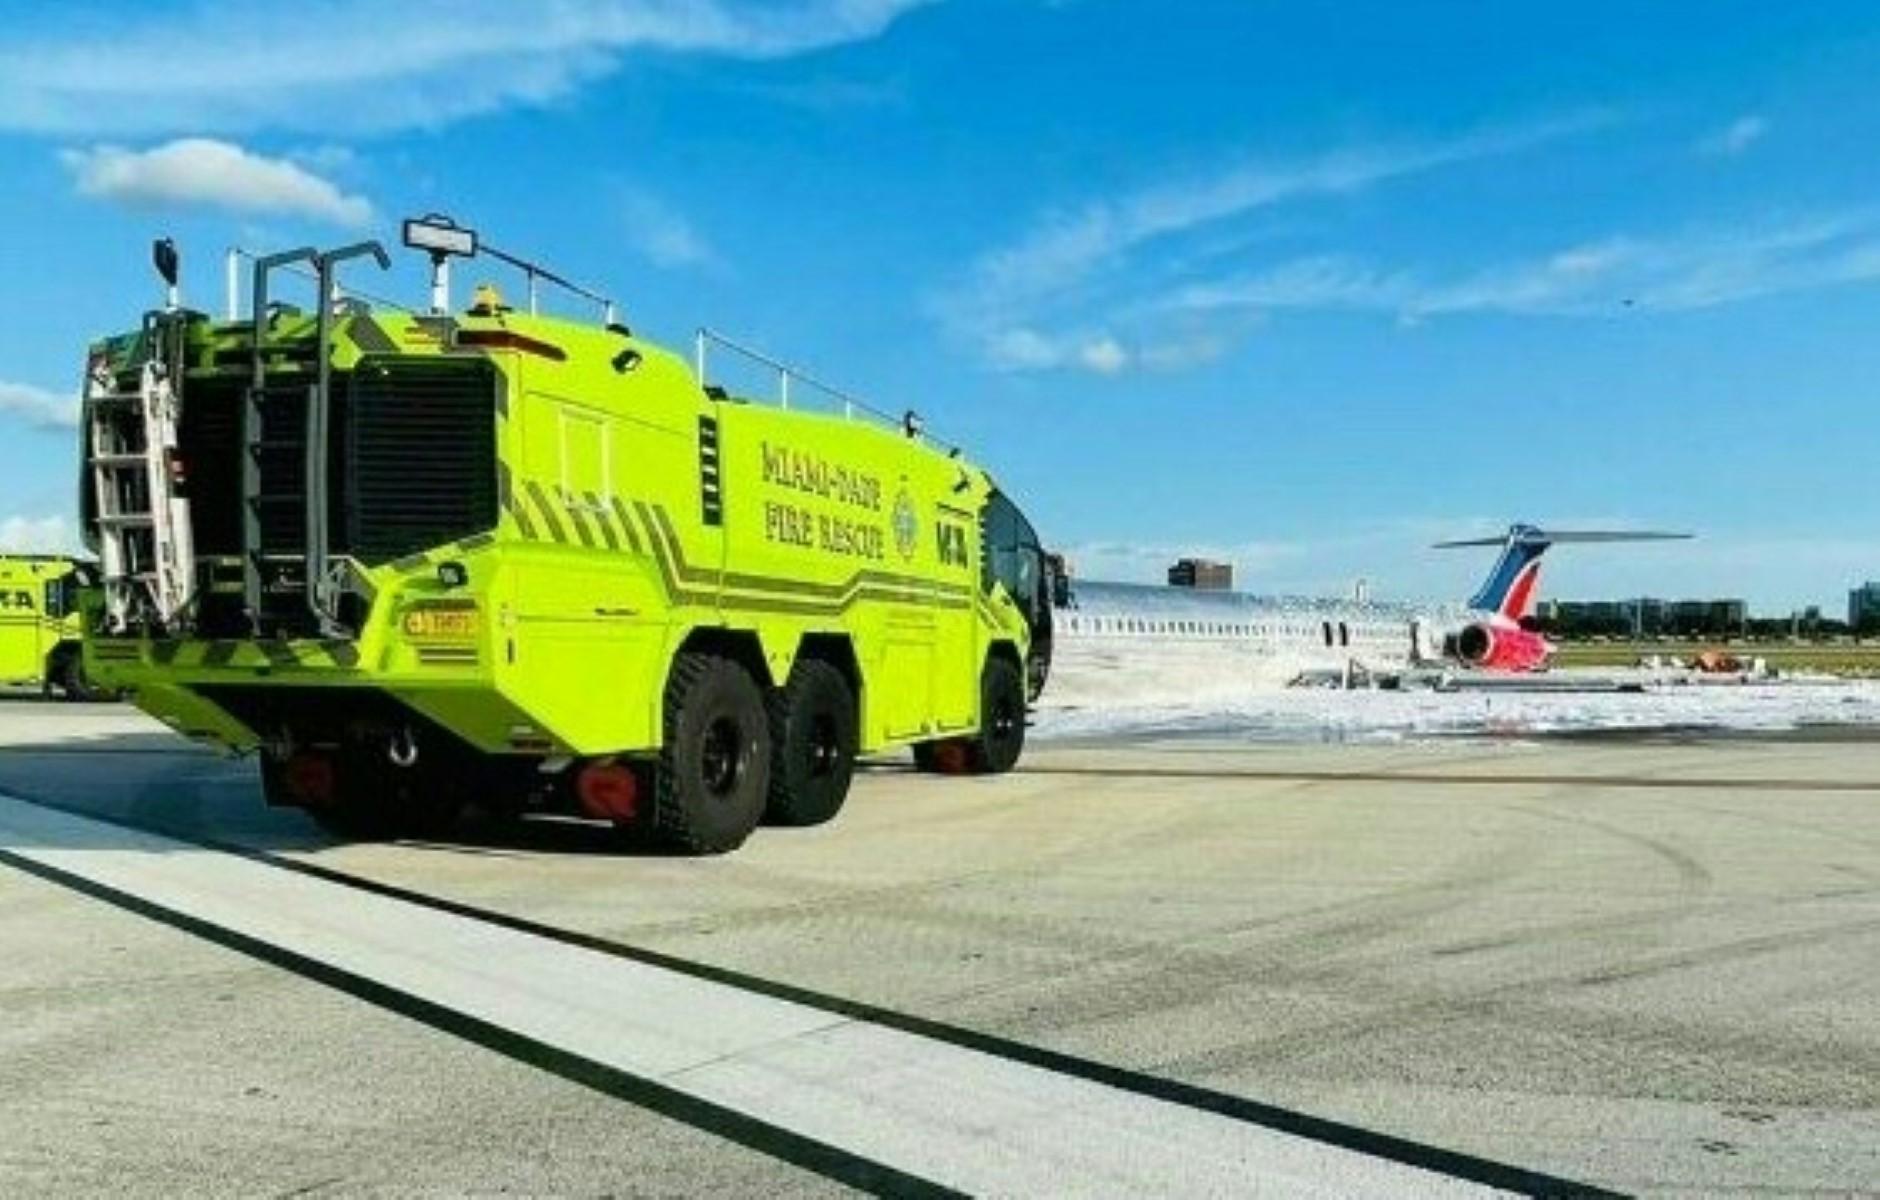 A handout picture provided by the Miami-Dade Fire Rescue shows a Red Air jet after catching fire while landing at Miami International Airport on June 22 in Miami, Florida. Photo: AFP